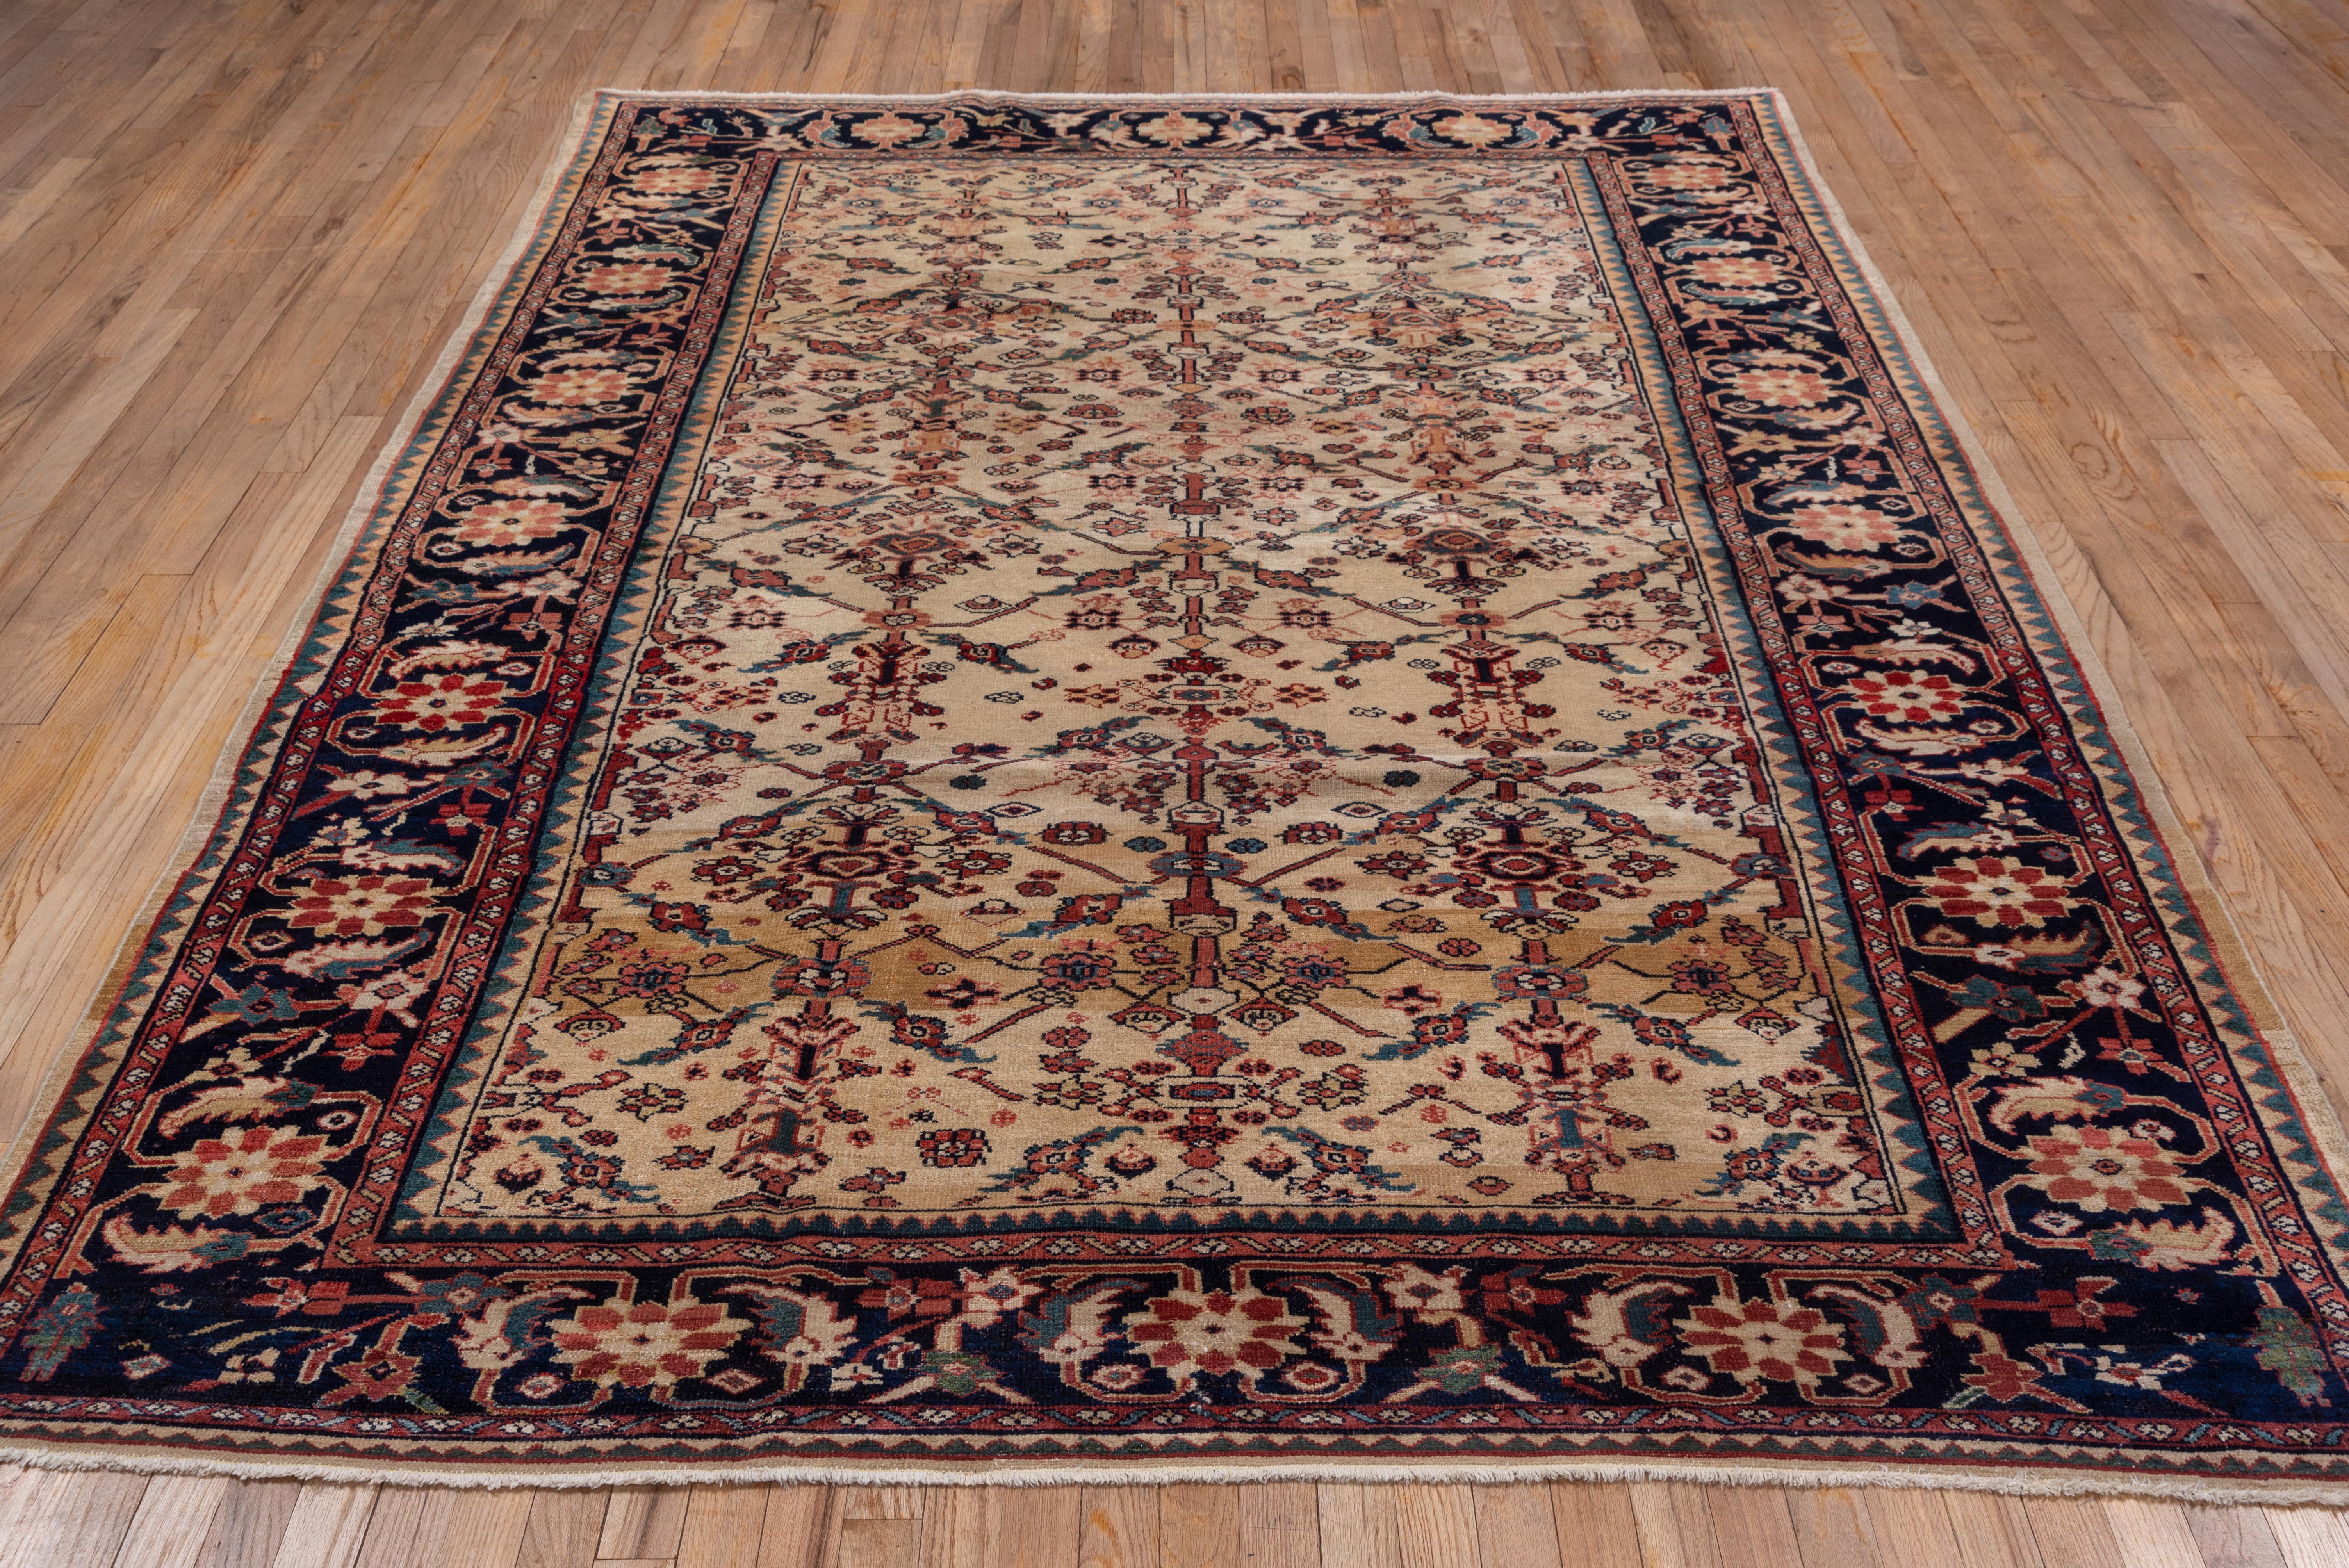 Early 20th Century Antique Persian Sultanabad Rug, Ivory Field, Dark Navy Borders, circa 1900s For Sale